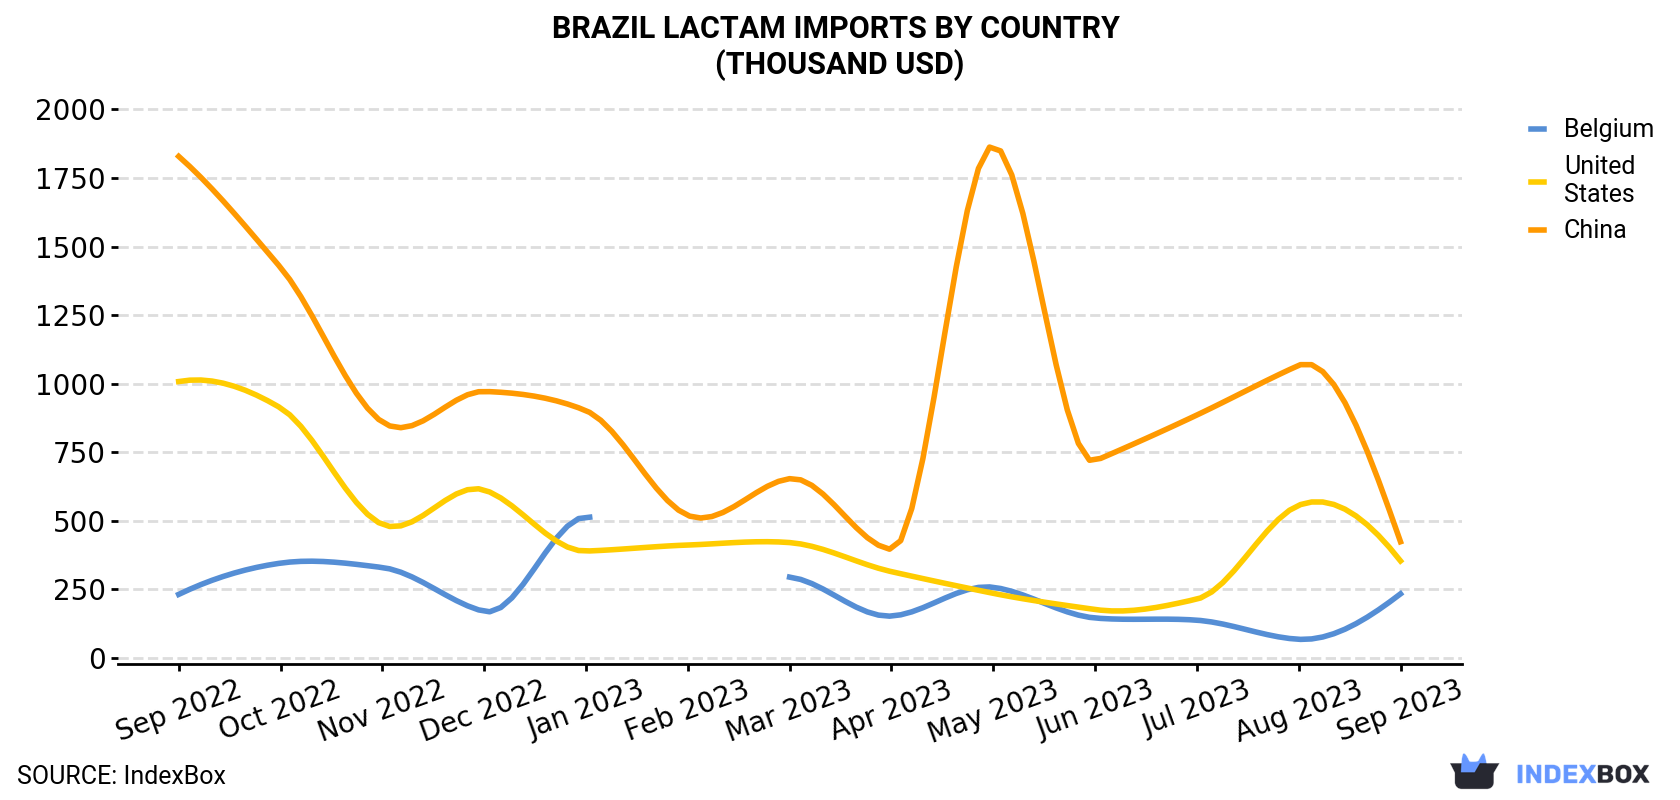 Brazil Lactam Imports By Country (Thousand USD)